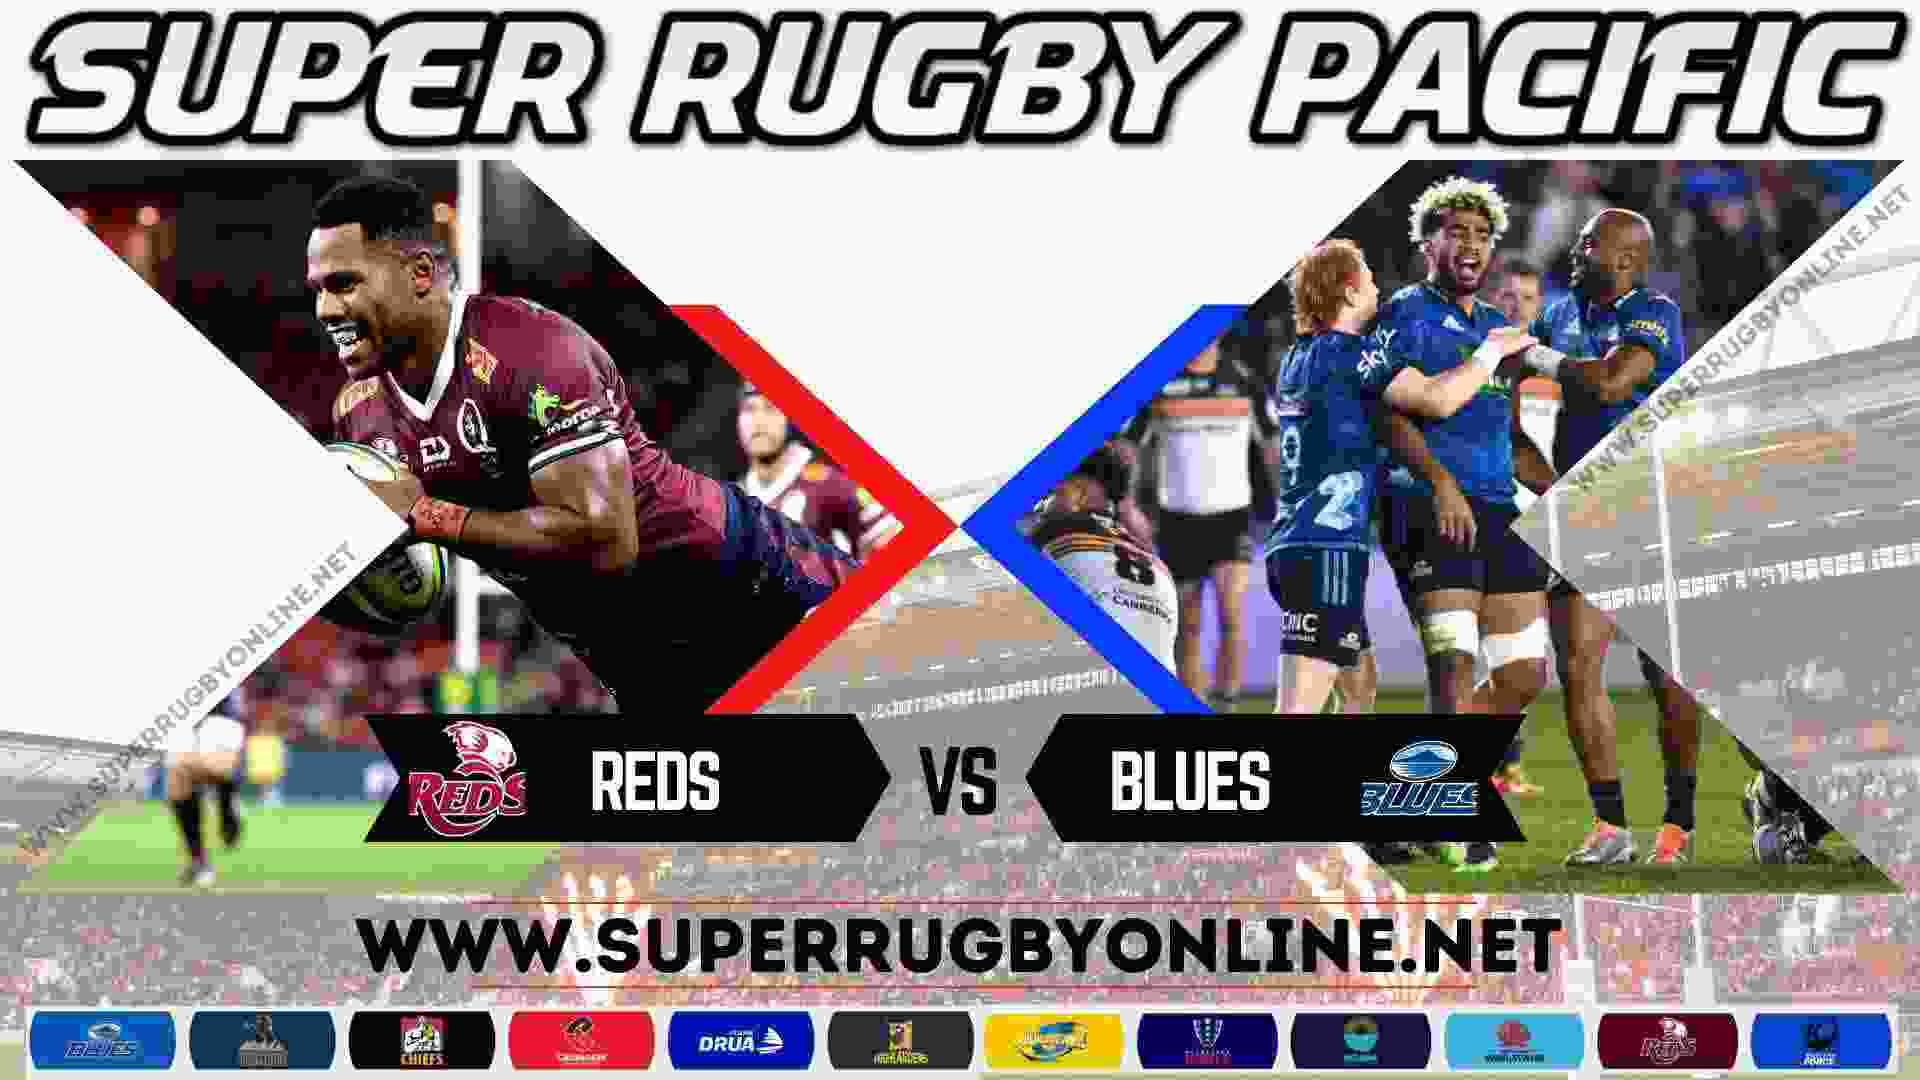 Reds Vs Blues Rugby Live